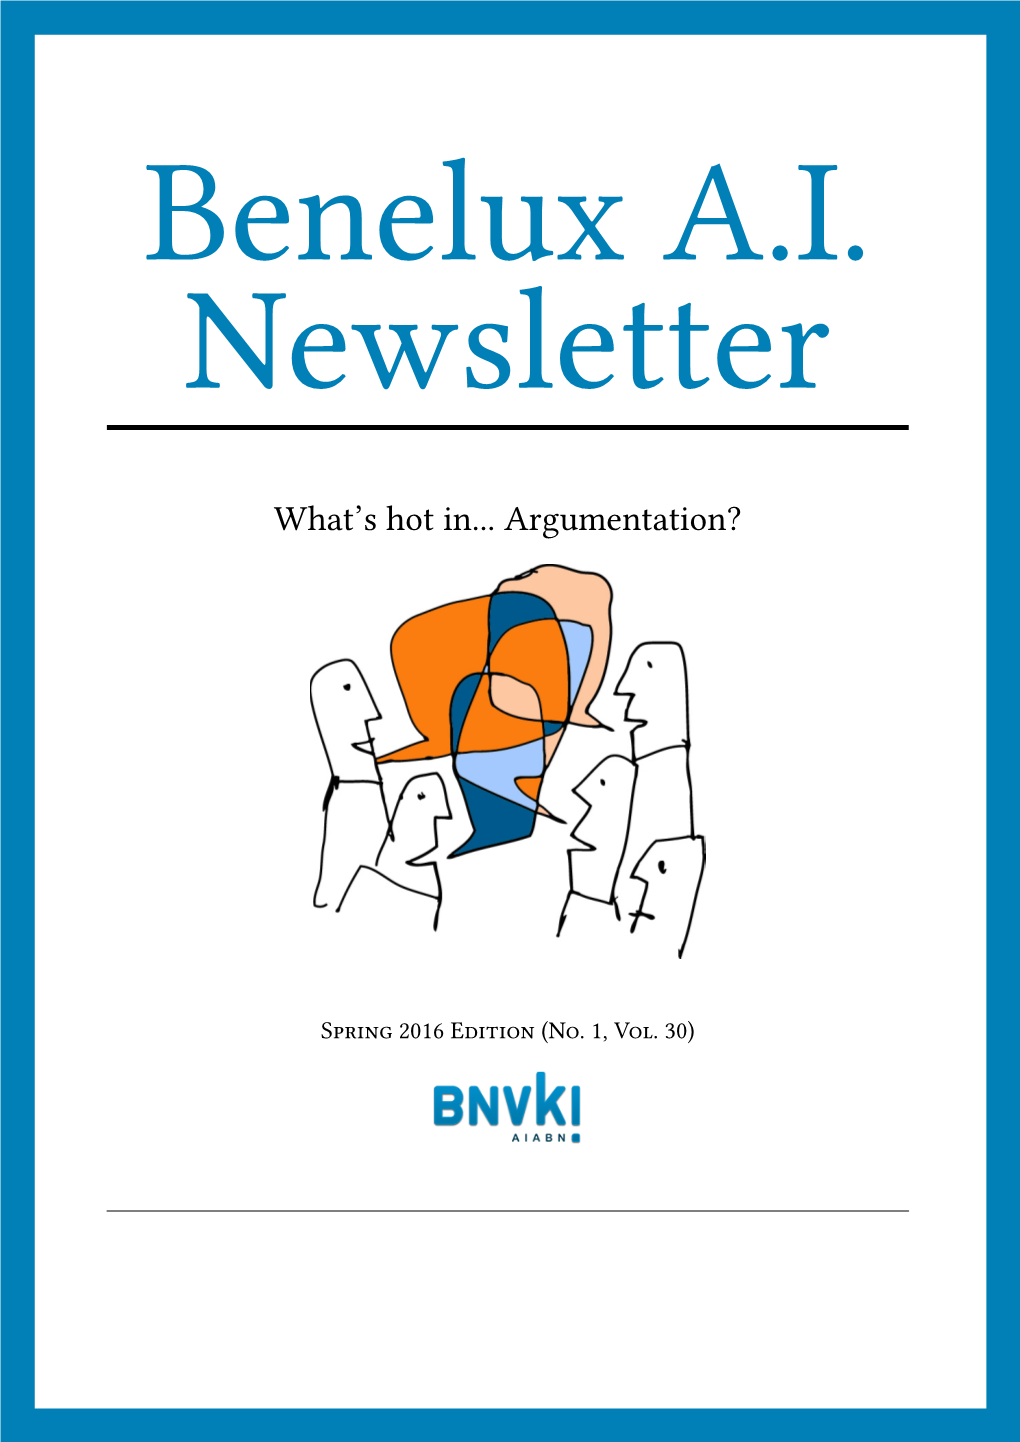 Benelux AI Newsletter Spring 2016